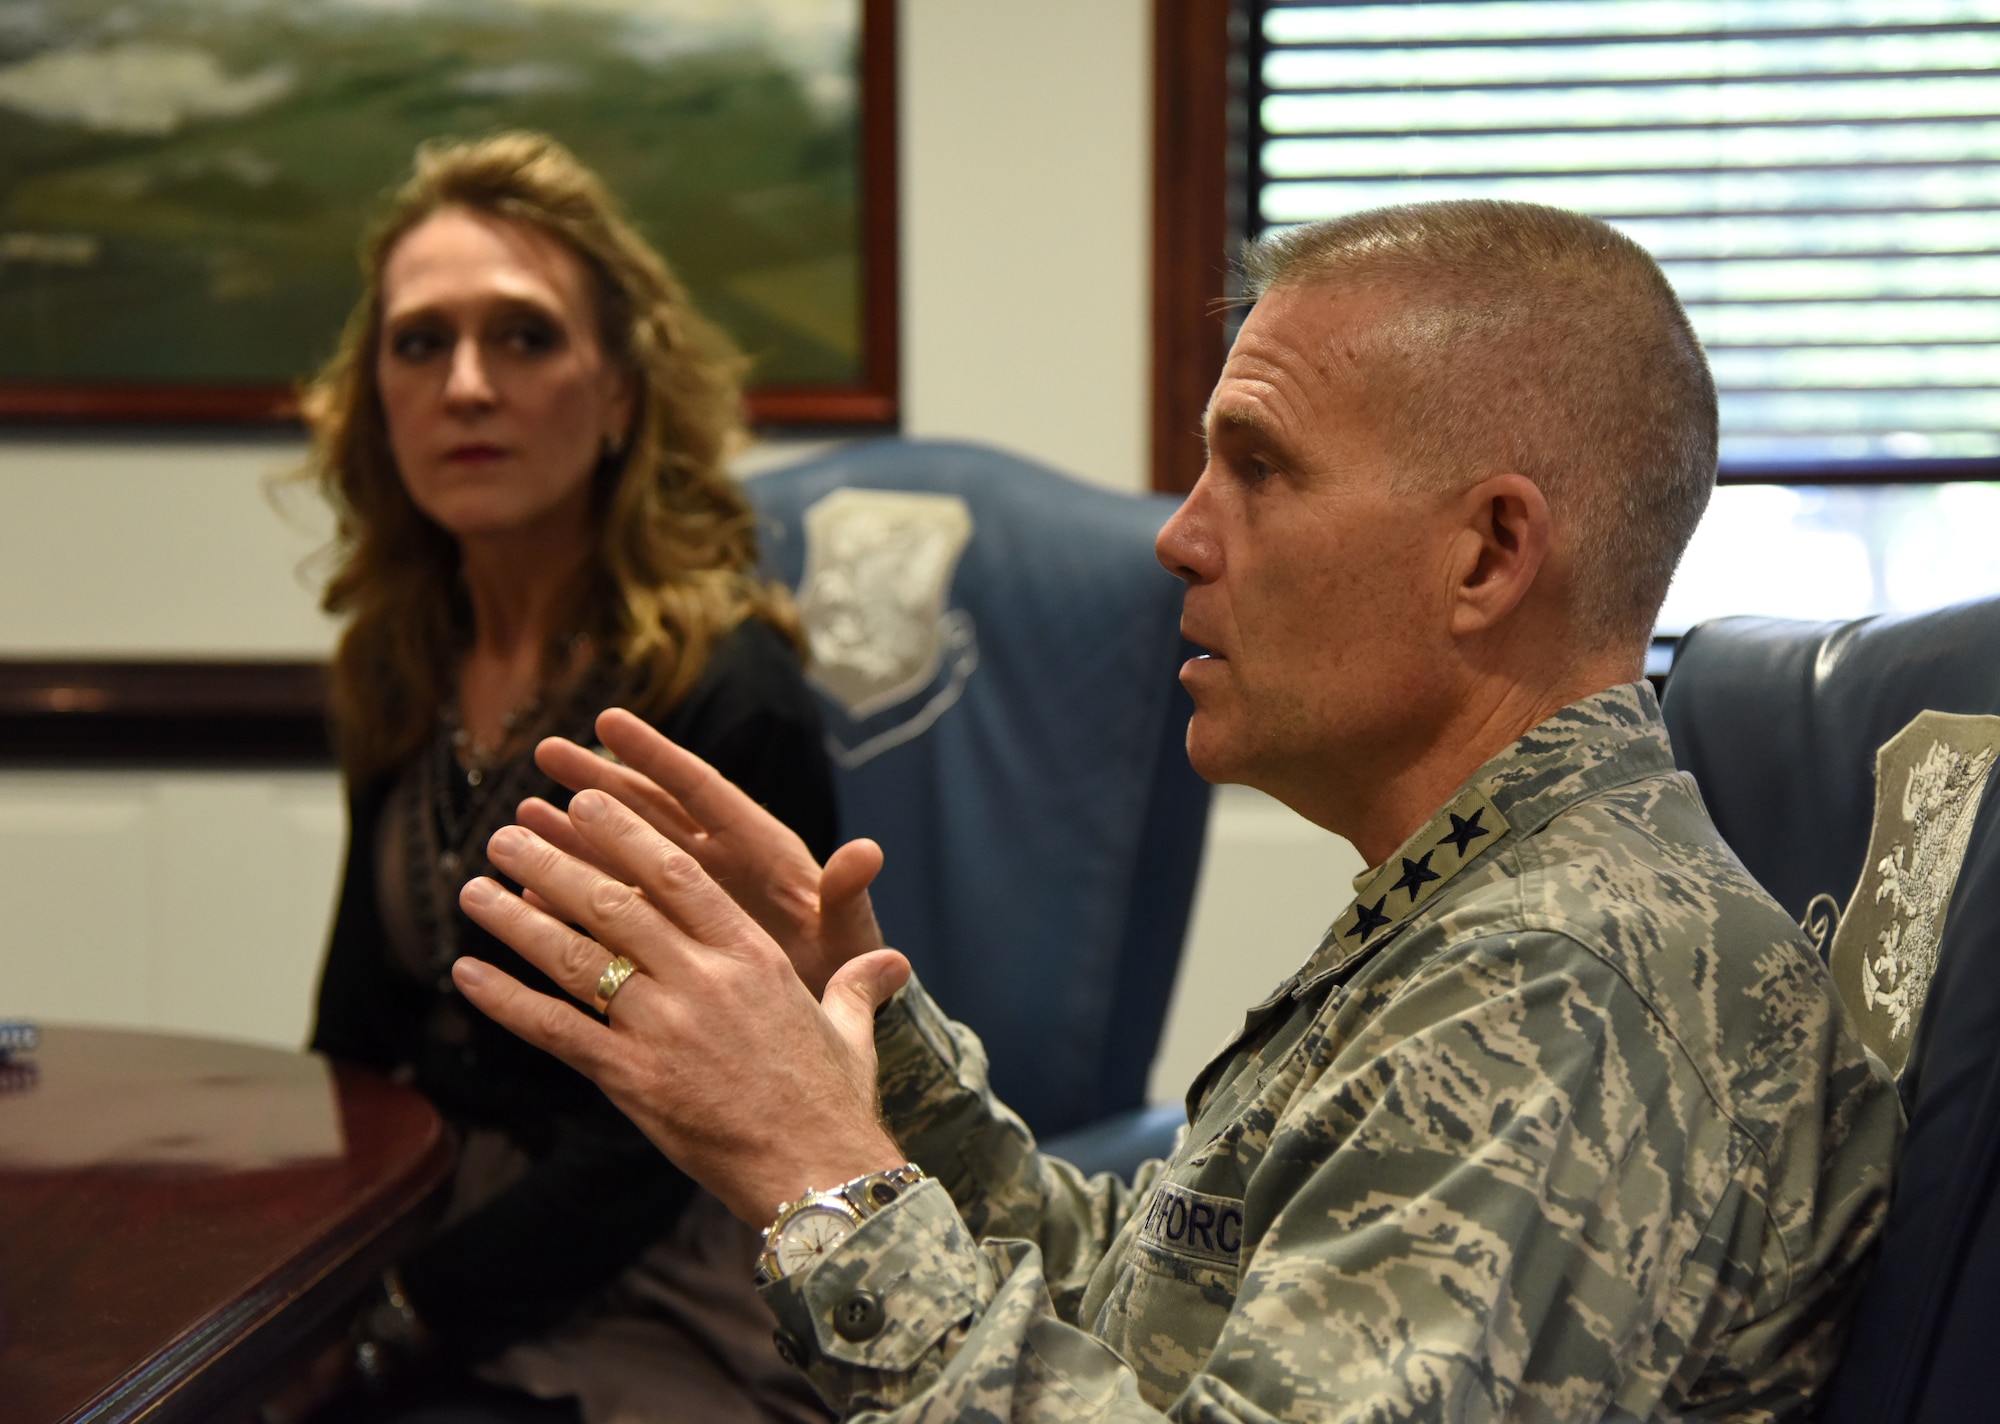 U.S. Air Force Lt. Gen. Steve Kwast, commander of Air Education and Training Command, speaks during a meet and greet session with Keesler’s Key Spouses at the 81st Training Wing headquarters building at Keesler Air Force Base, Mississippi, May 18, 2018. The meeting was held to discuss the key spouse program benefits and how to increase involvement. (U.S. Air Force photo by Kemberly Groue)